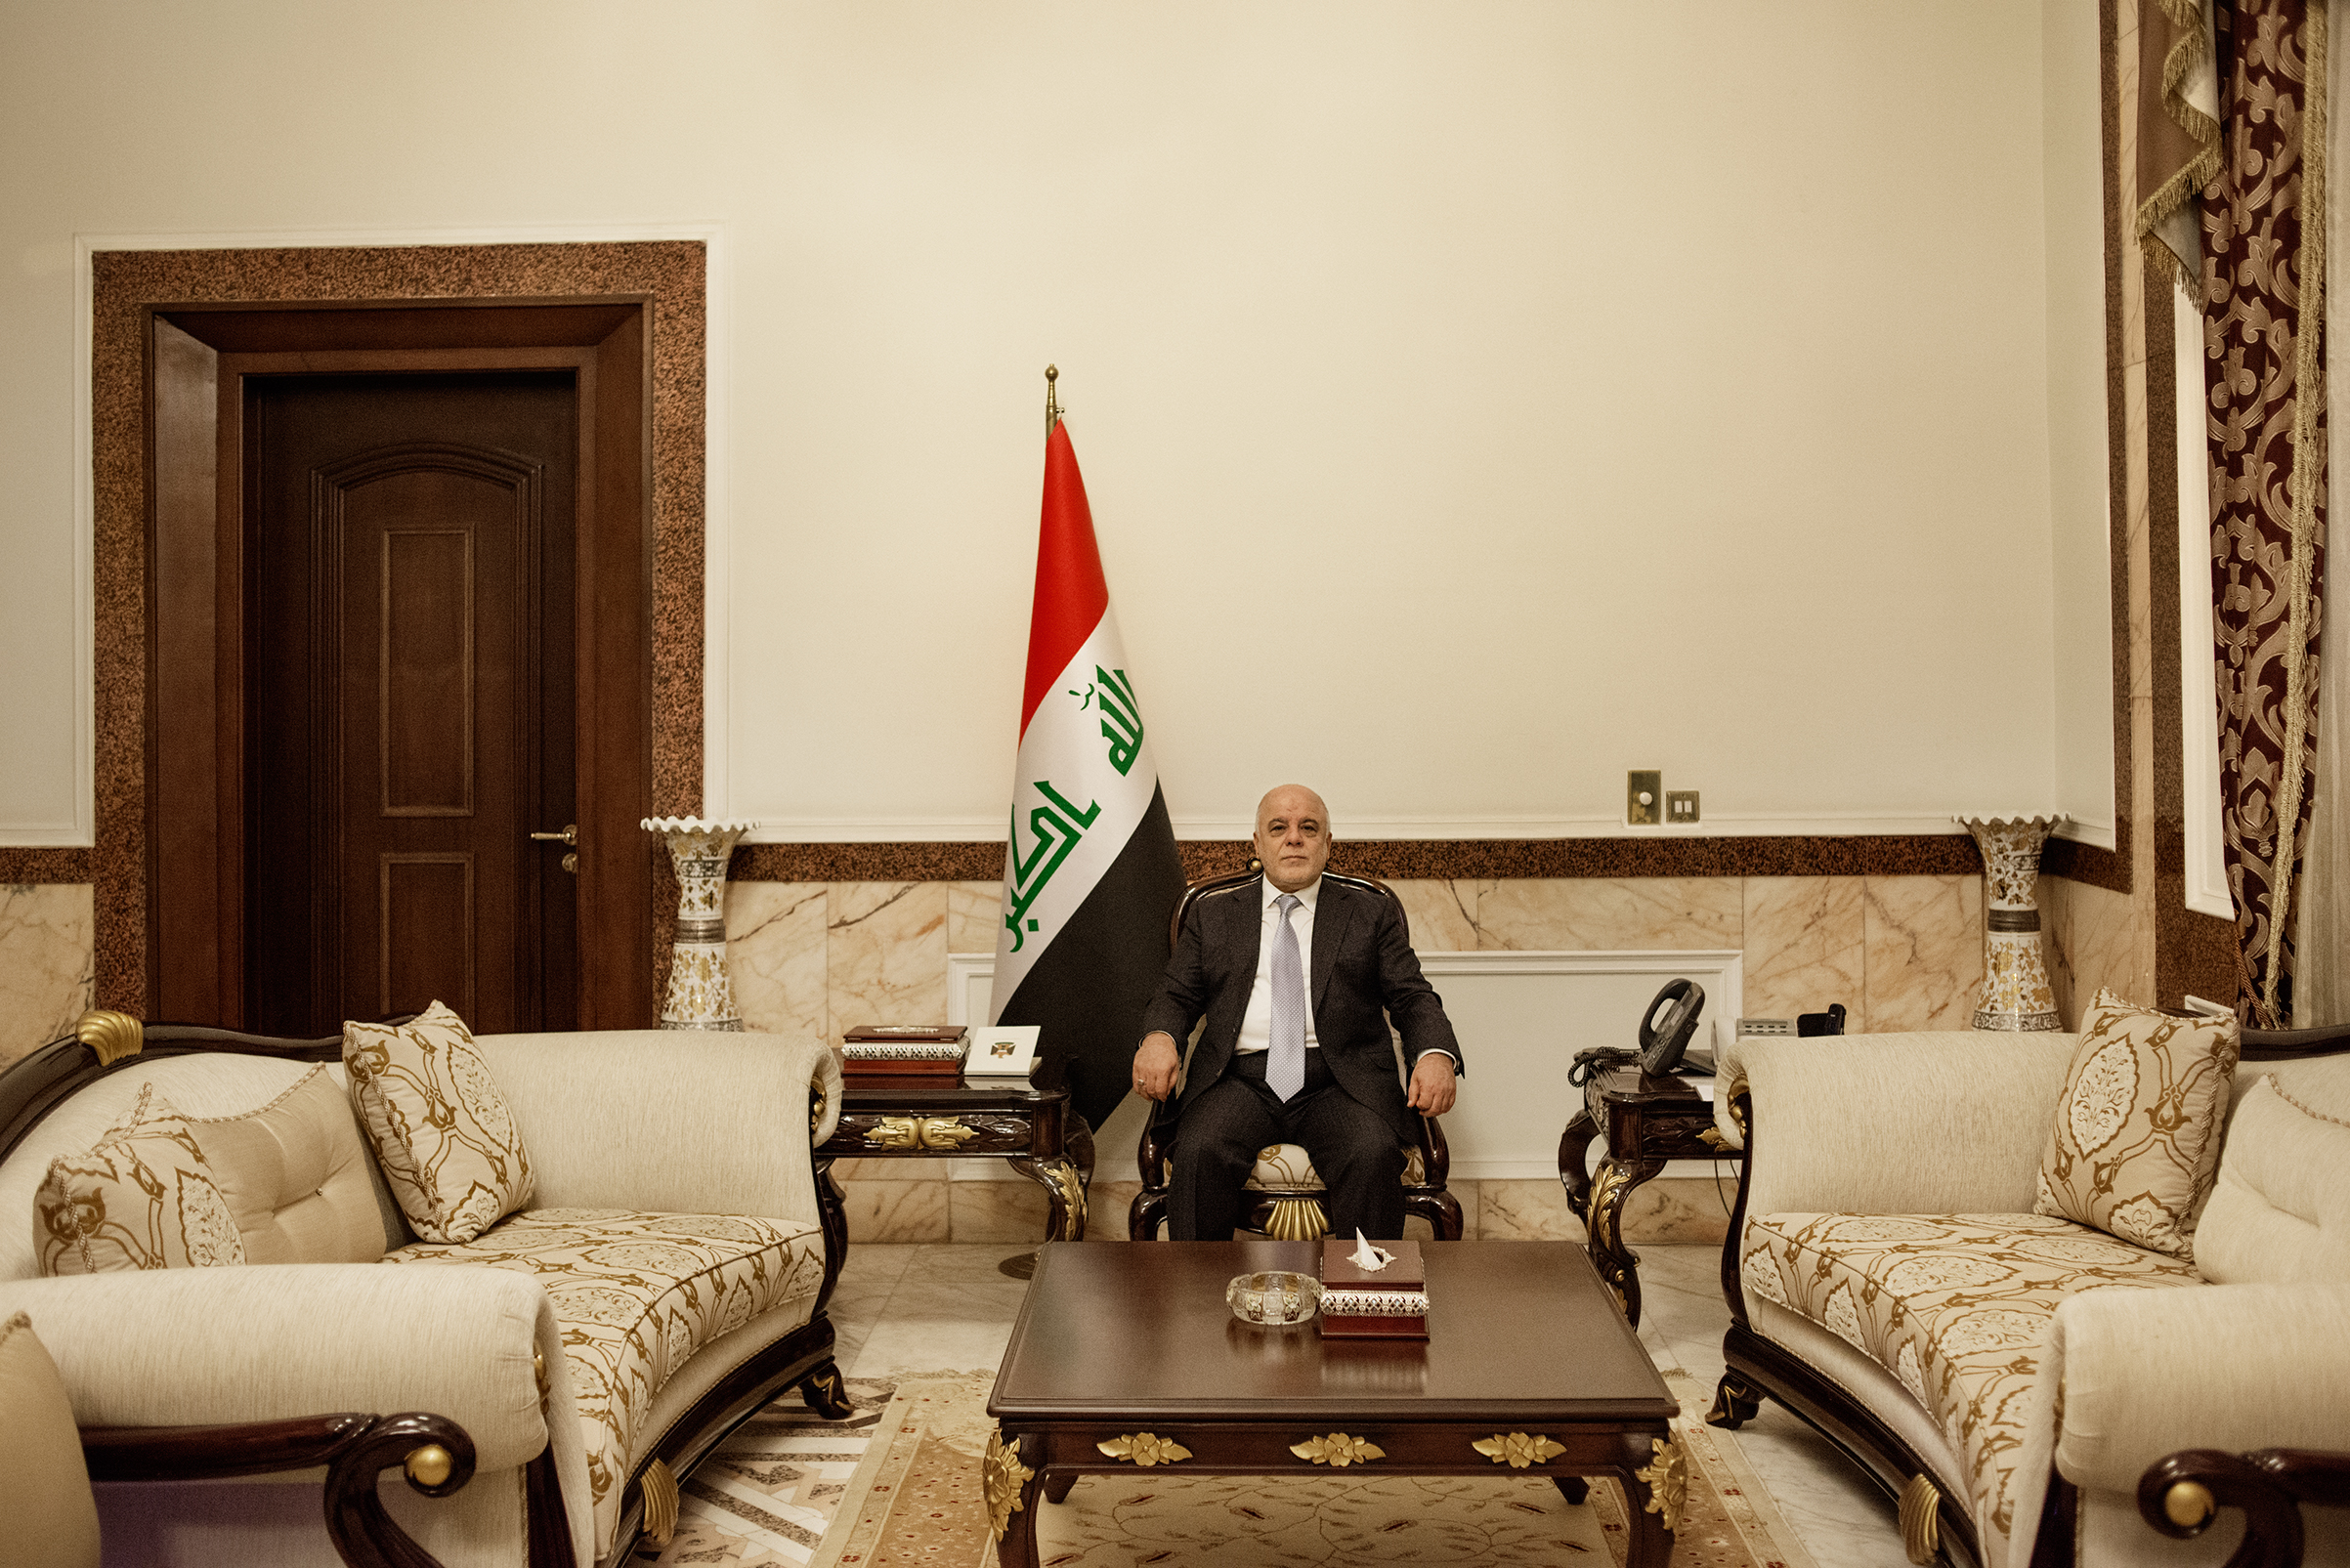 Prime Minister Haider al-Abadi in his office at Saddam Hussein’s old Republican Palace in Baghdad on Jan. 29; after the 2003 invasion, it became the headquarters of the U.S. occupation. (Emanuele Satolli for TIME)